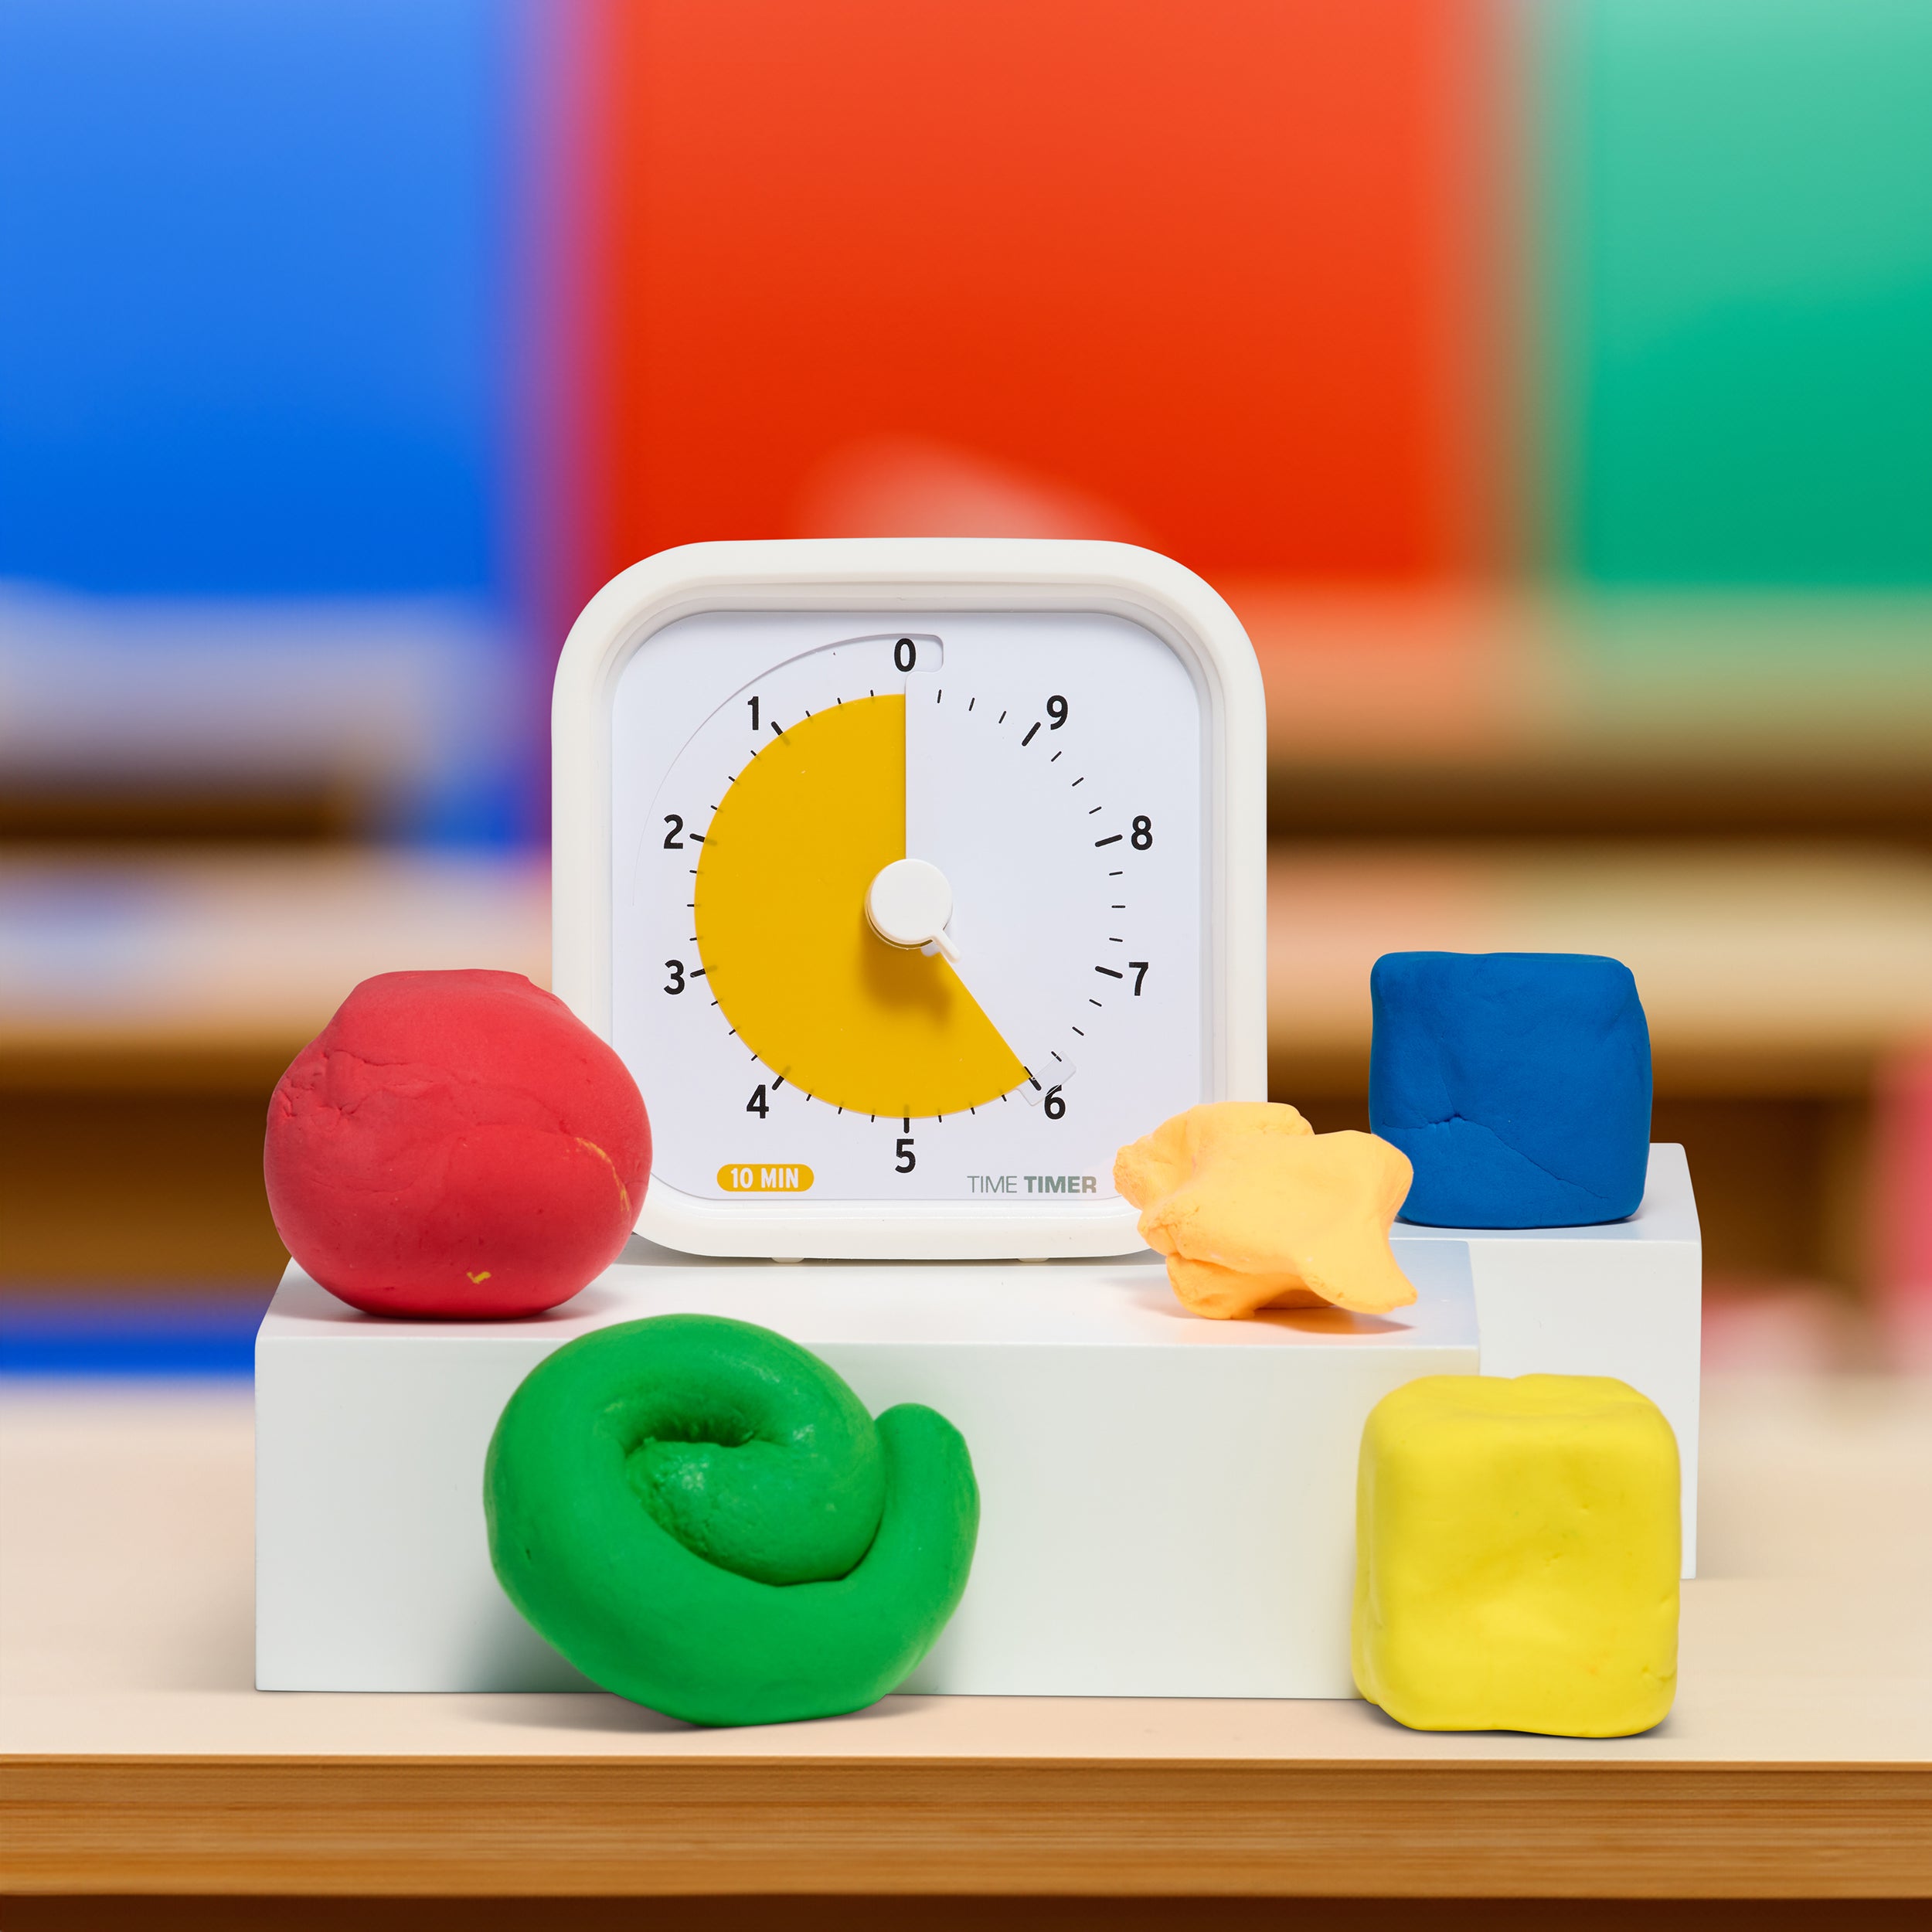 The Time Timer MOD Education Edition 10 Minute timer is shown next to some play dough shapes in colorful classroom setting. 